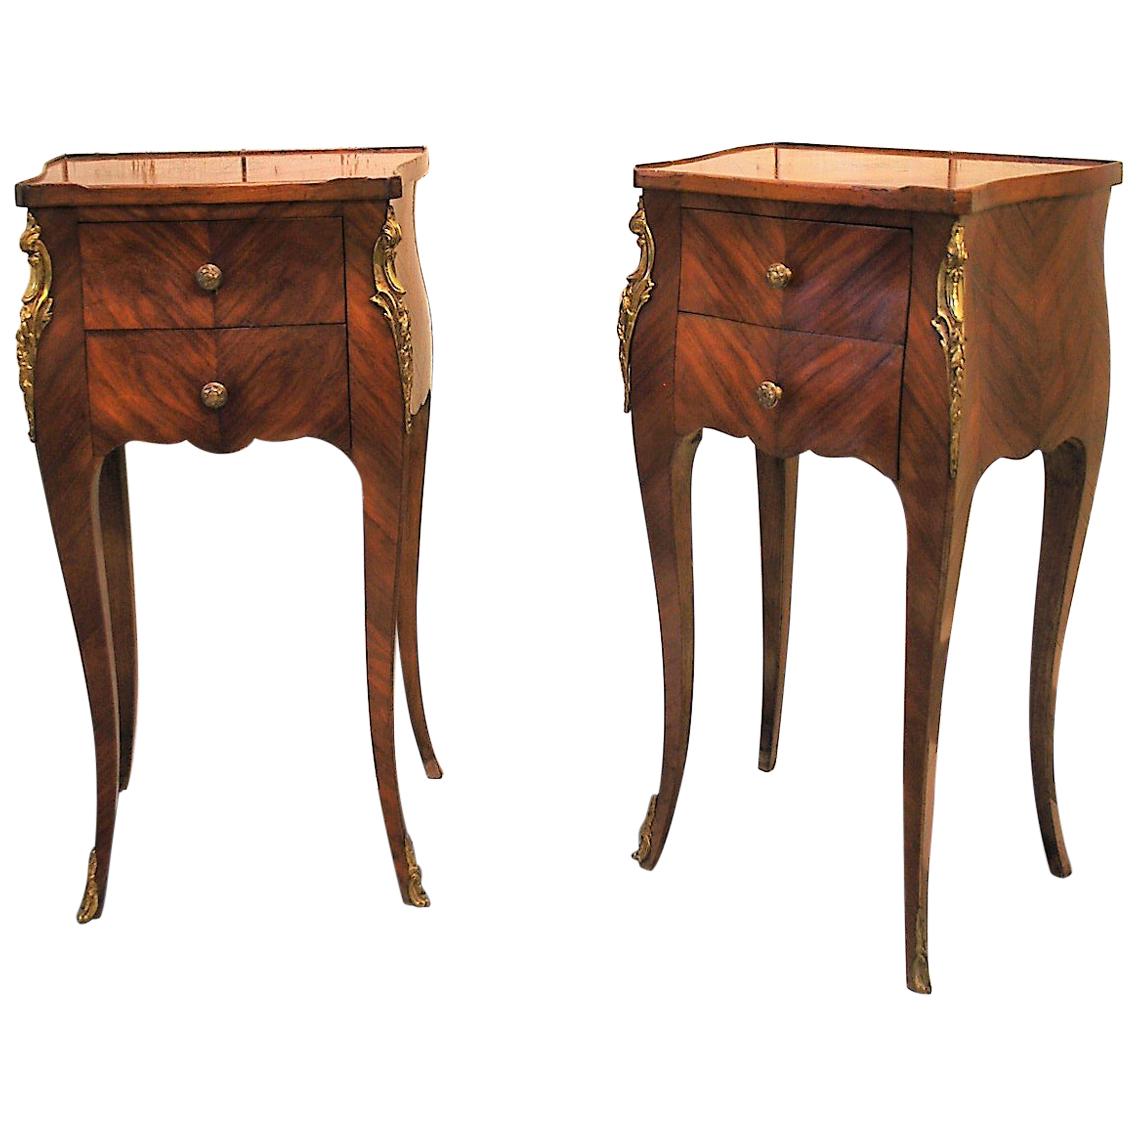 Pair of French Tulipwood Bedside Cabinets or Nightstands For Sale